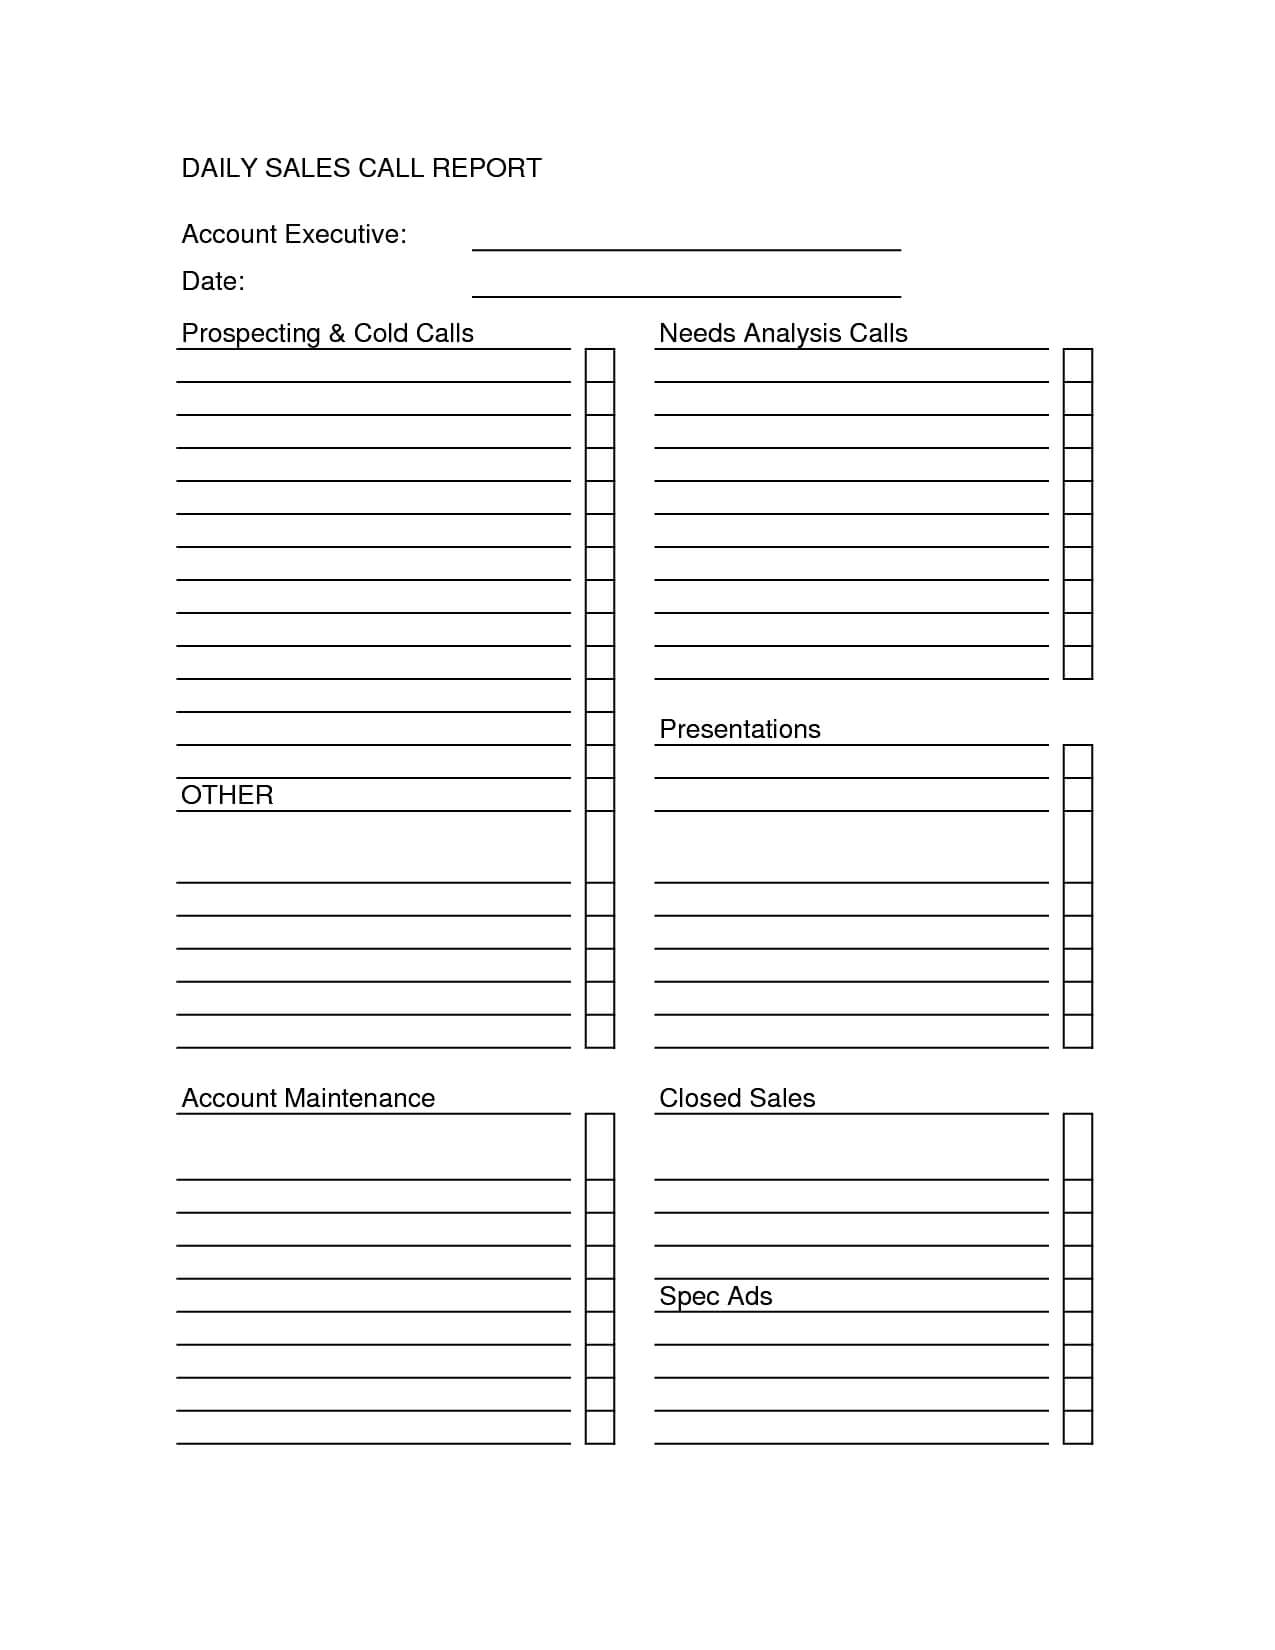 Sales Call Report Templates – Word Excel Fomats Within Daily Sales Call Report Template Free Download